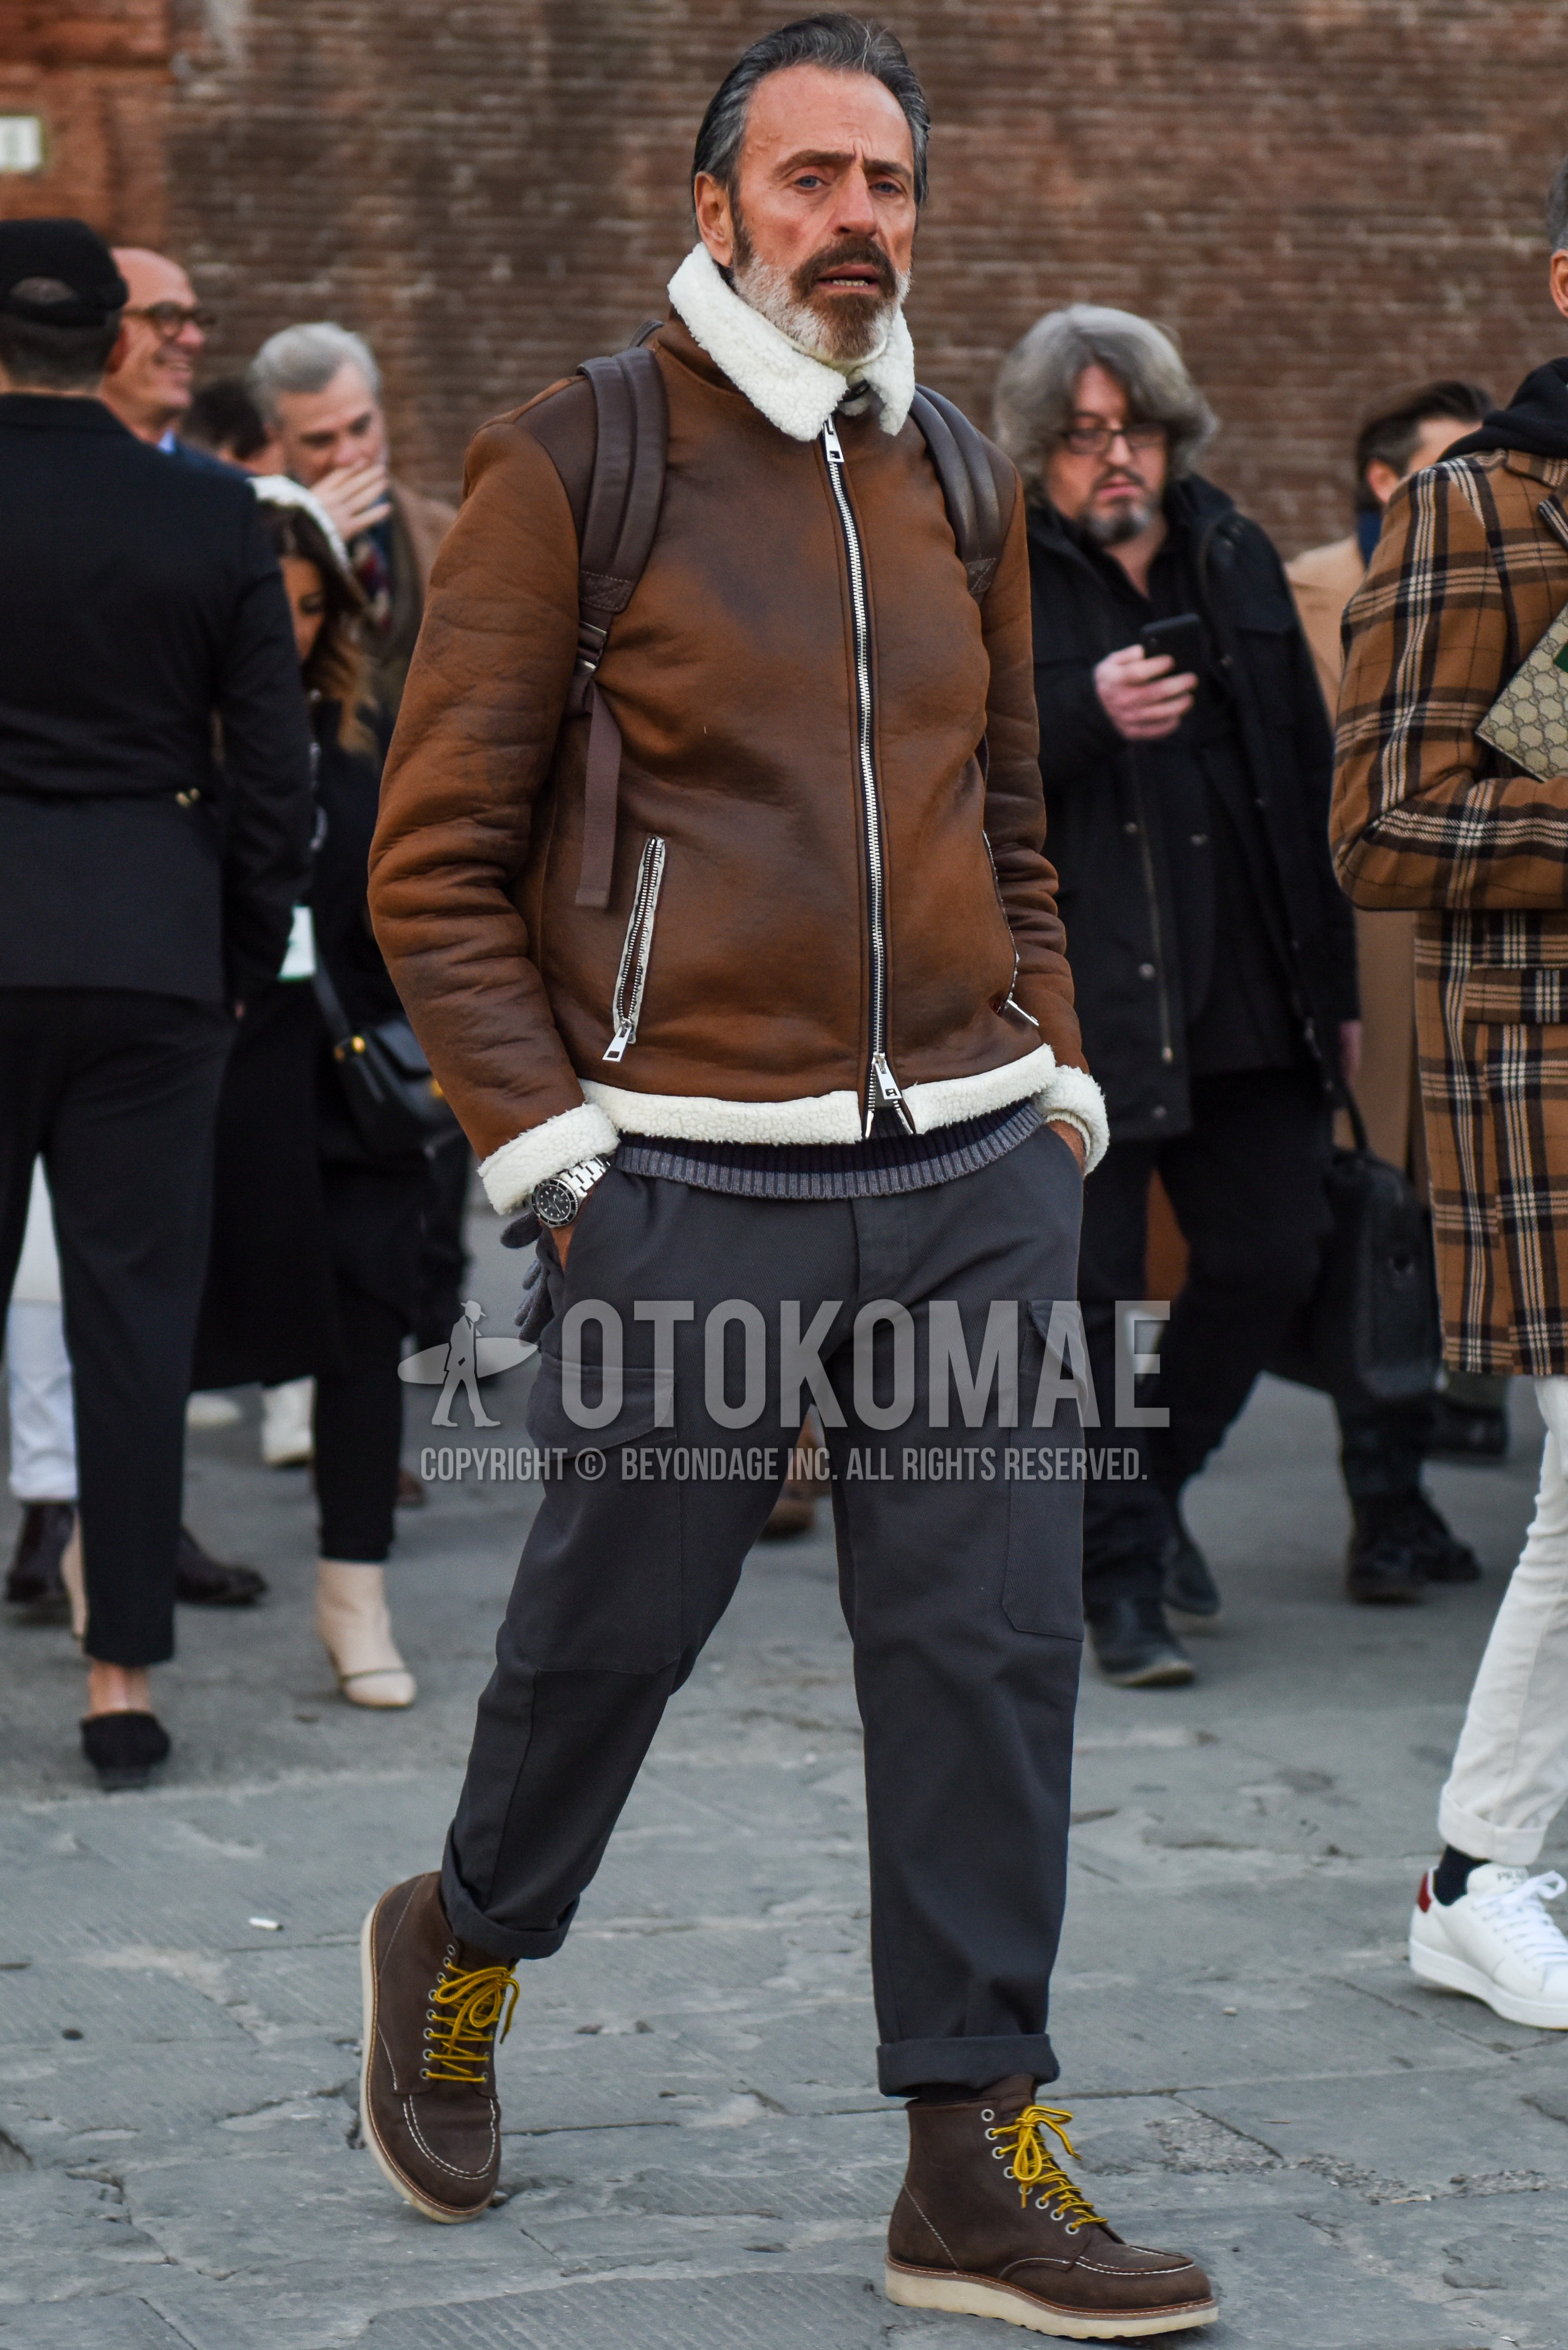 Men's autumn winter outfit with brown plain leather jacket, brown plain military jacket, gray plain cargo pants, brown work boots.